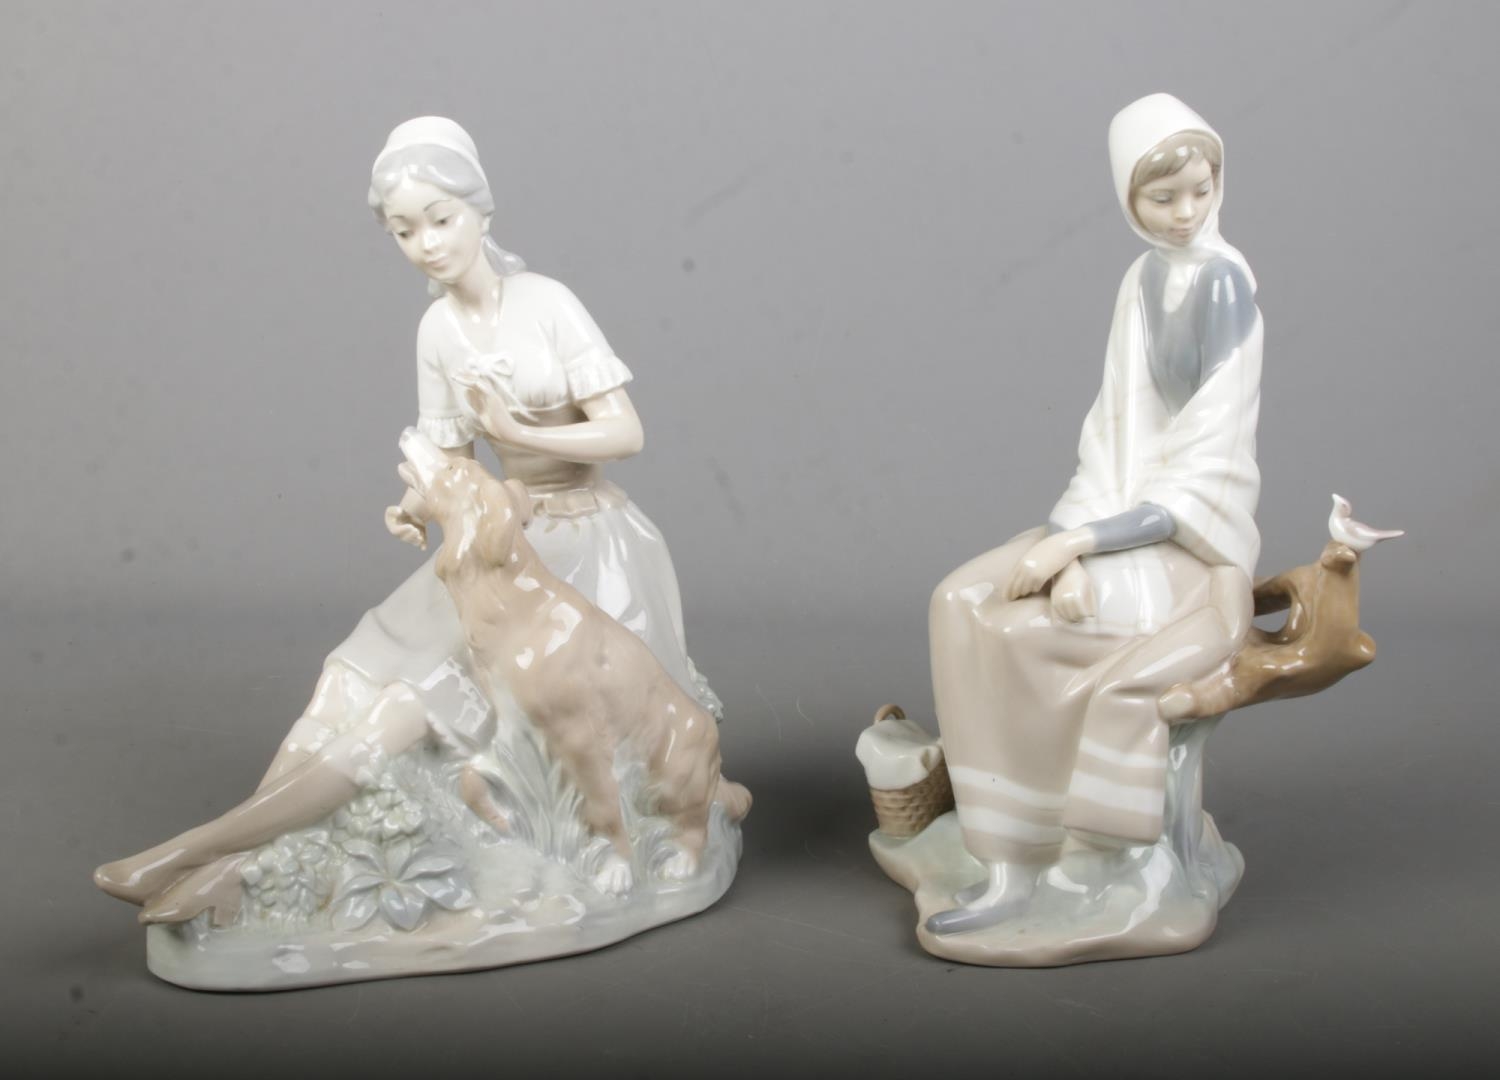 Two Nao by Lladro ceramic figures each depicting seated maidens interacting with animals.